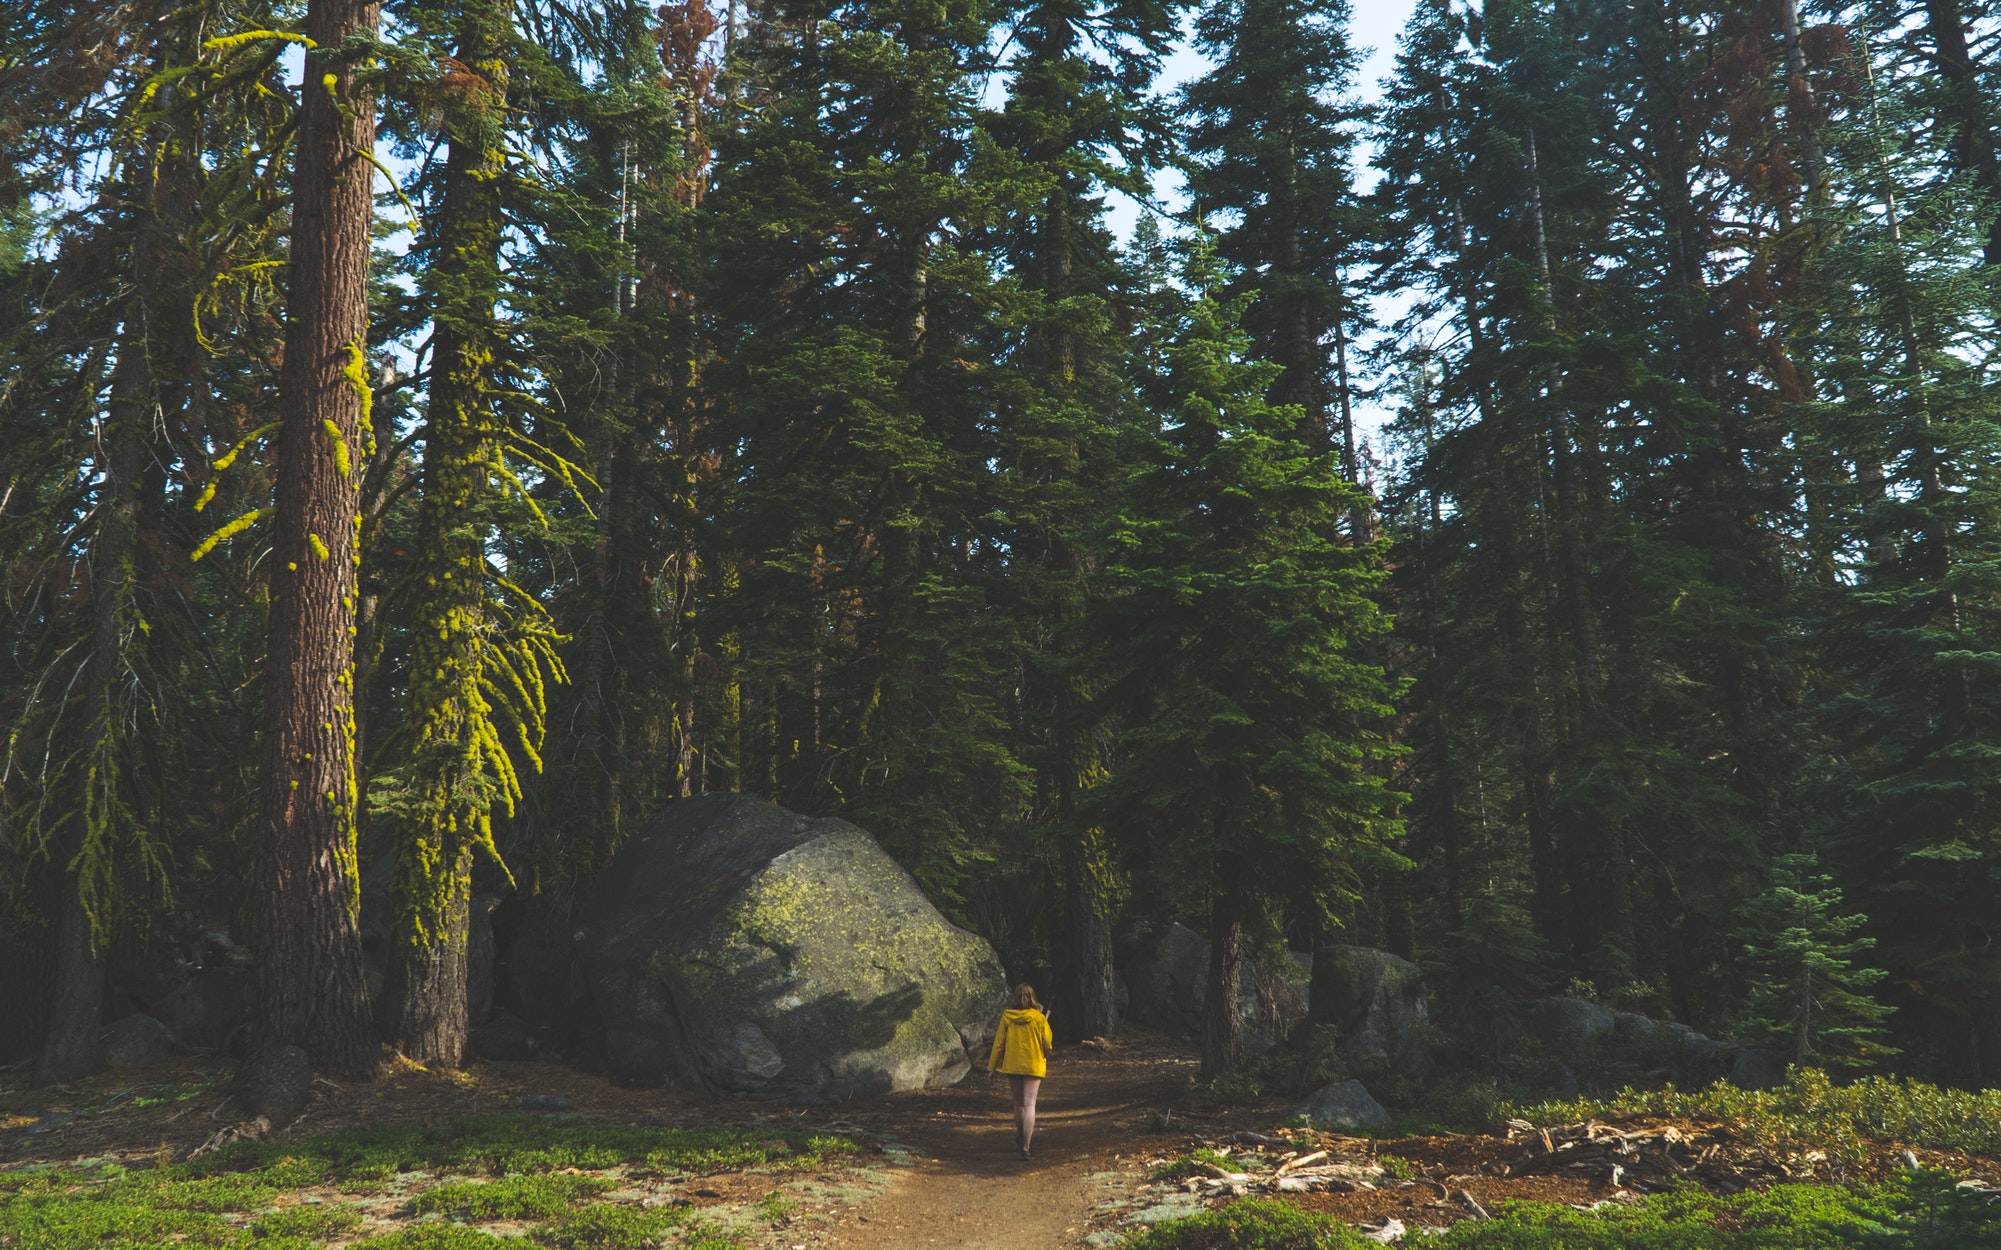 Jake Hinds, Women outdoors, Back, Walking, Landscape, Nature, Photography, USA, North America, Yosemite Valley, Forest, Trees, Rock, Path, Tree stump Wallpaper